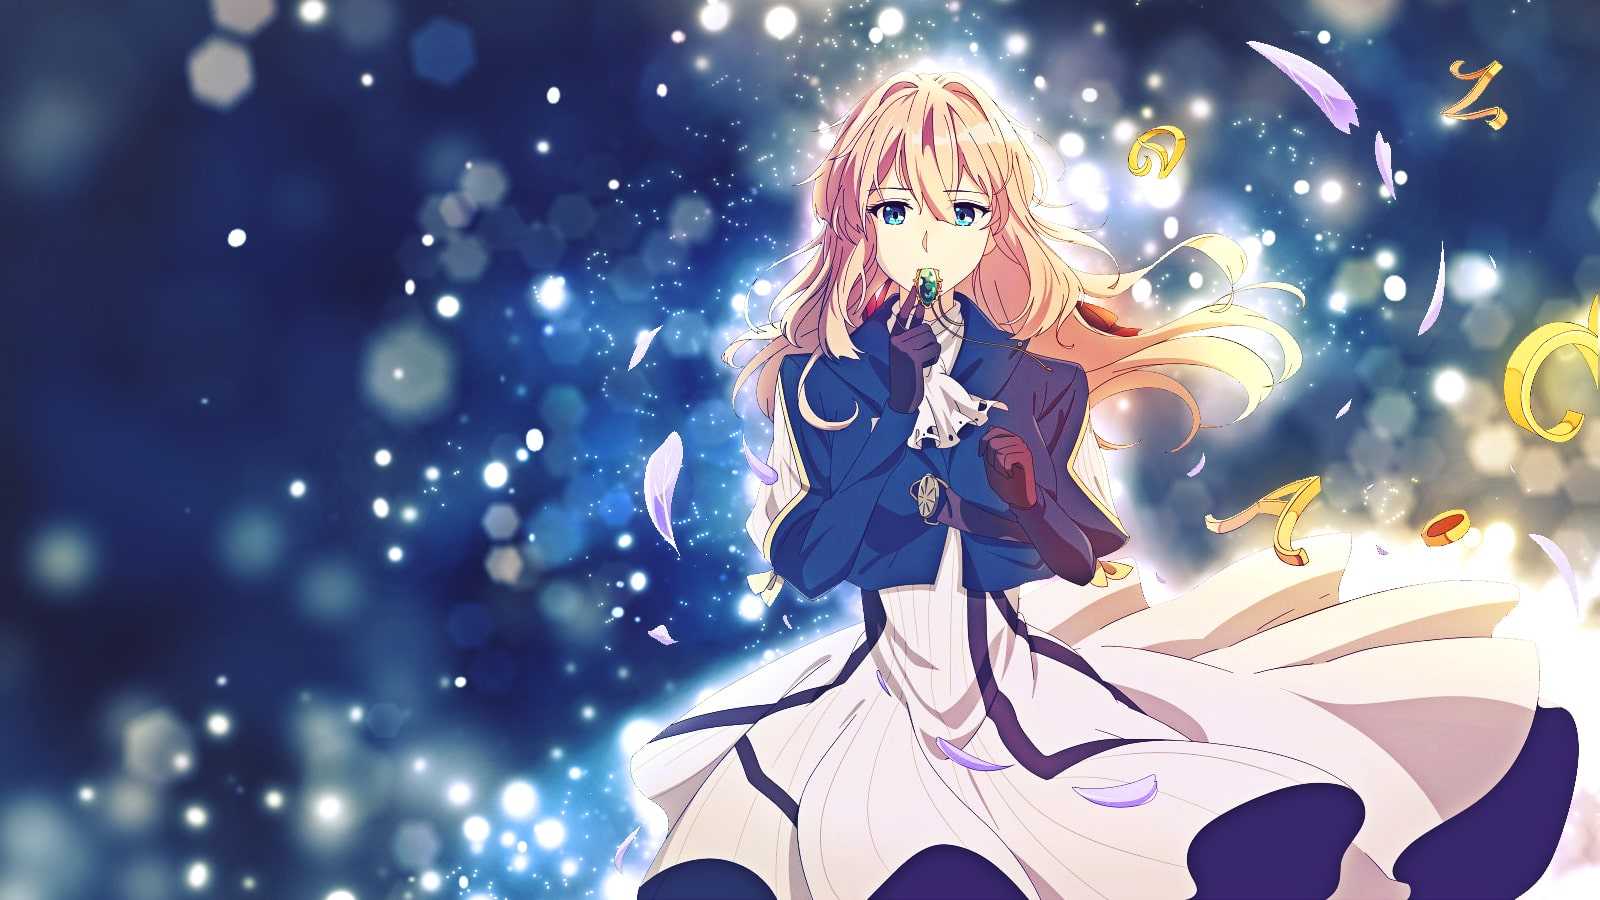 Violet Evergarden Wallpapers Kolpaper Awesome Free Hd Wallpapers